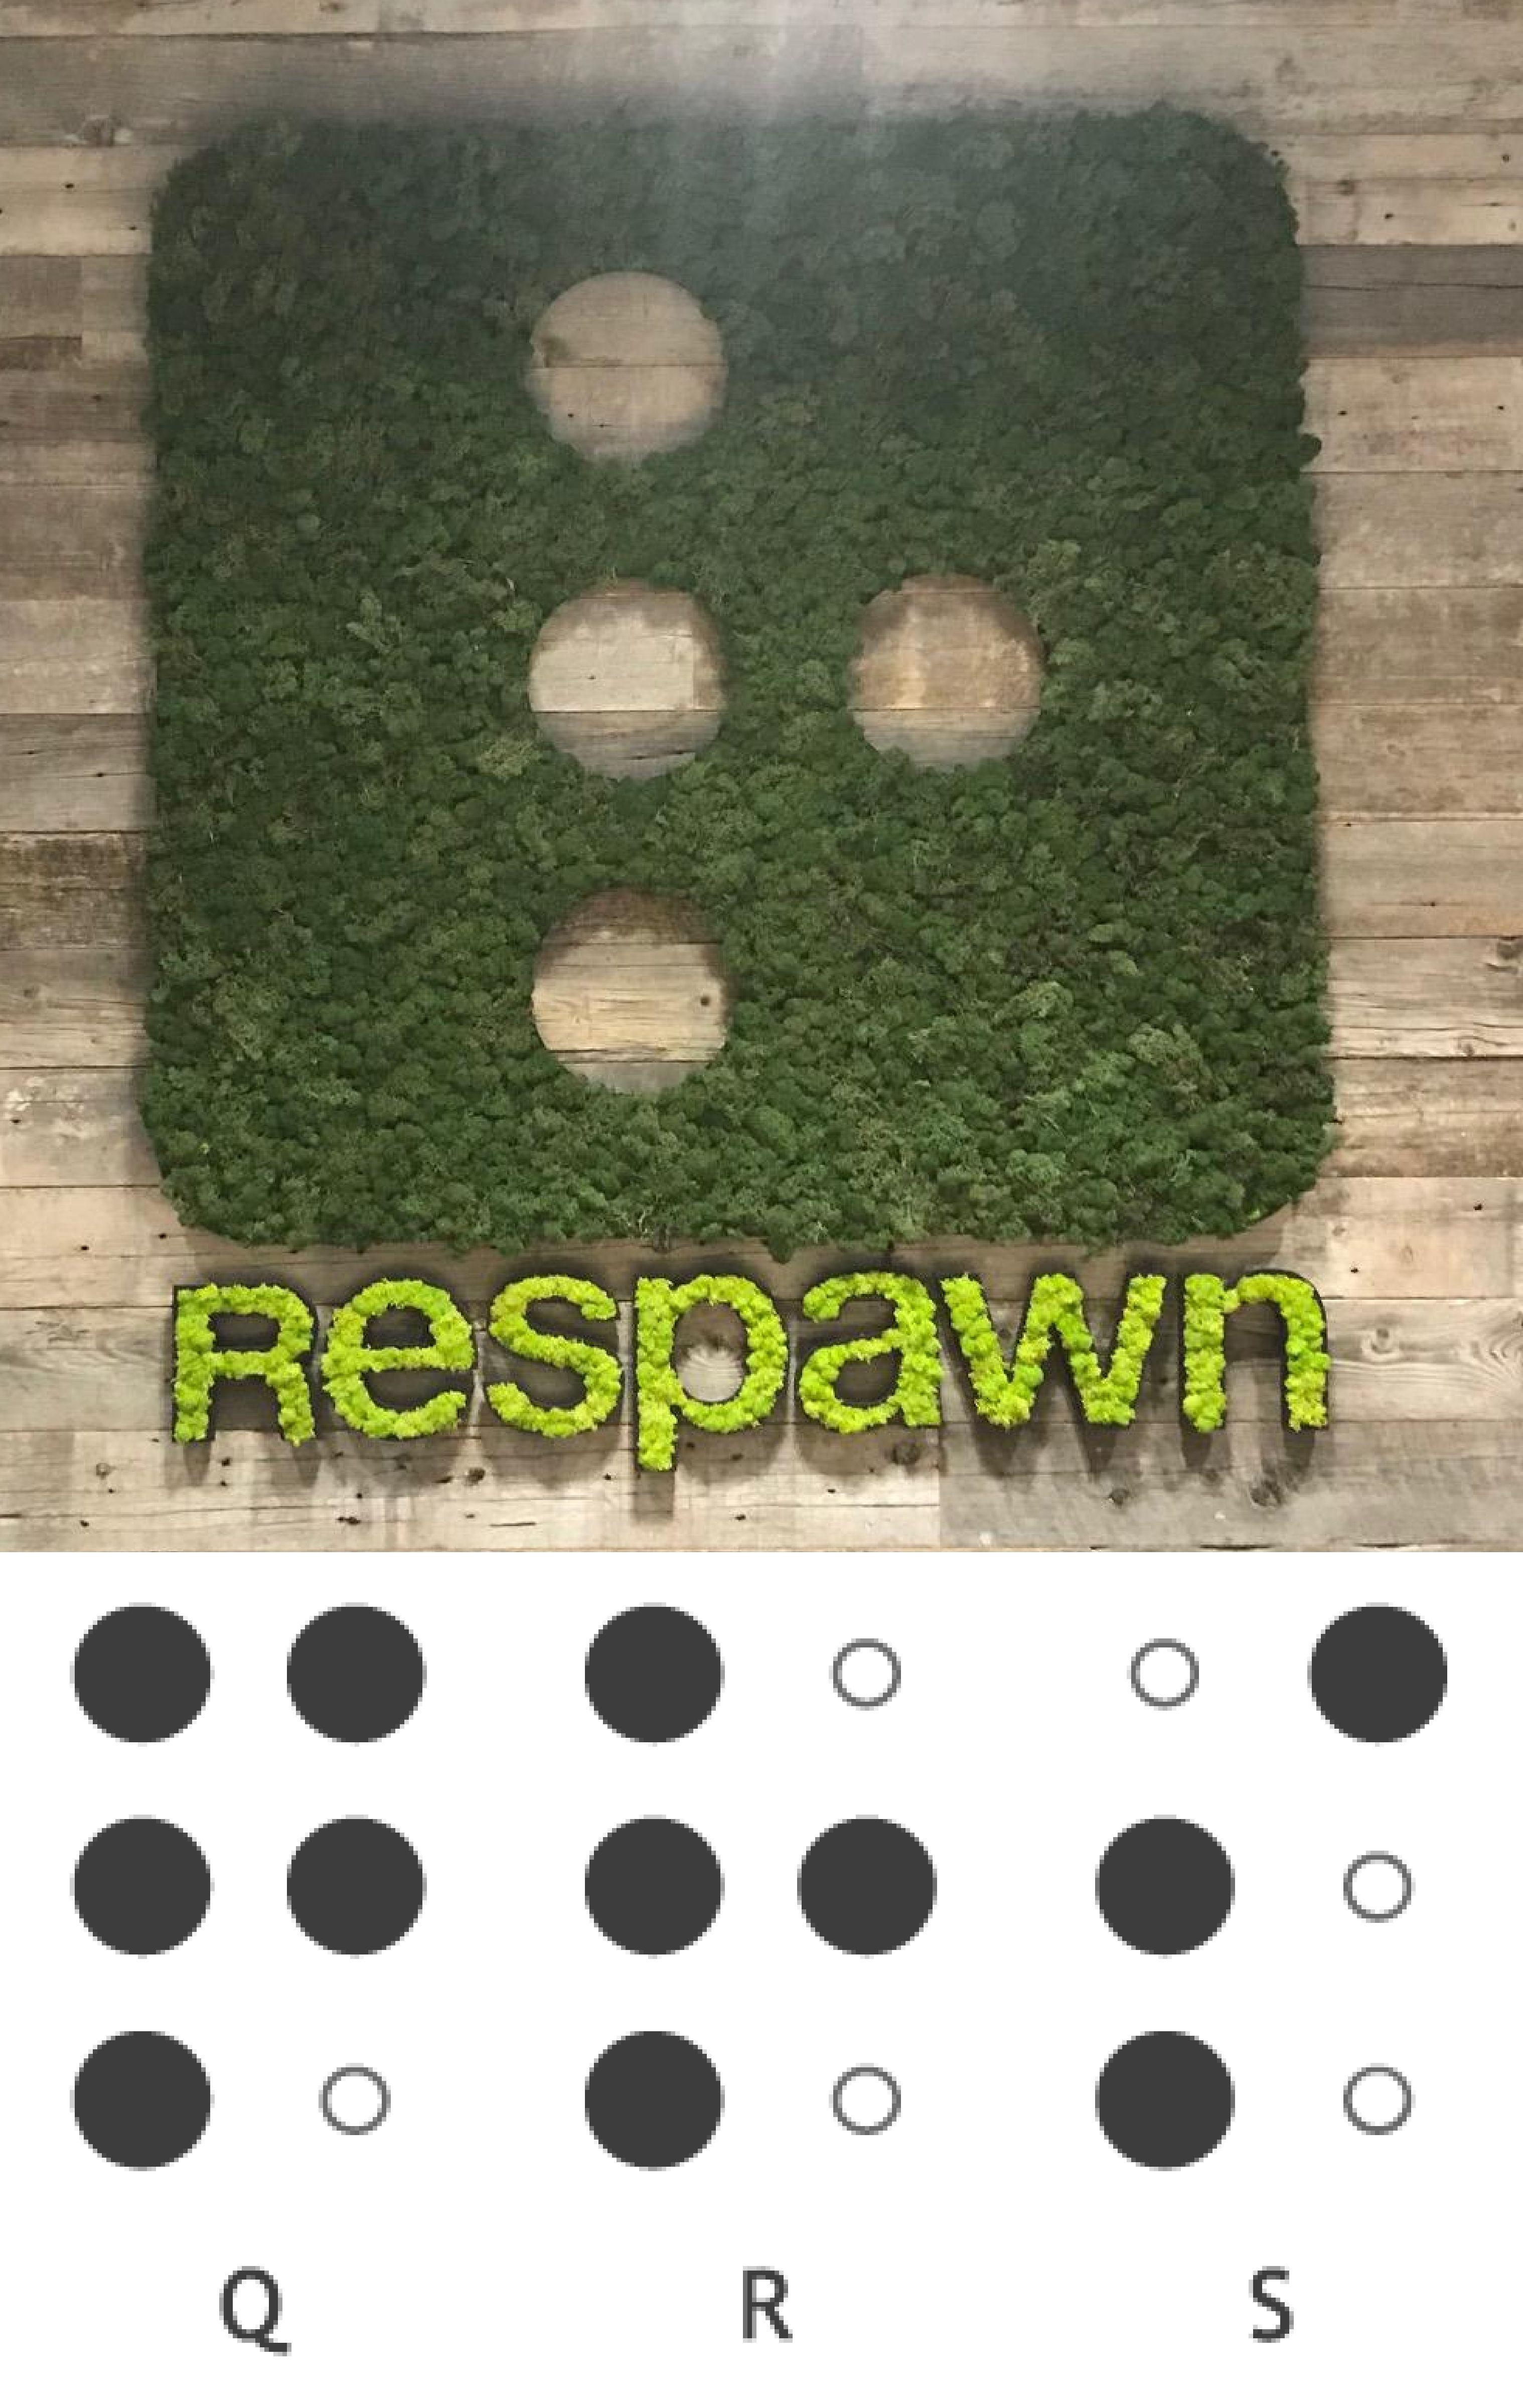 Respawn Logo - Respawn's Logo is the braille character for R : apexlegends